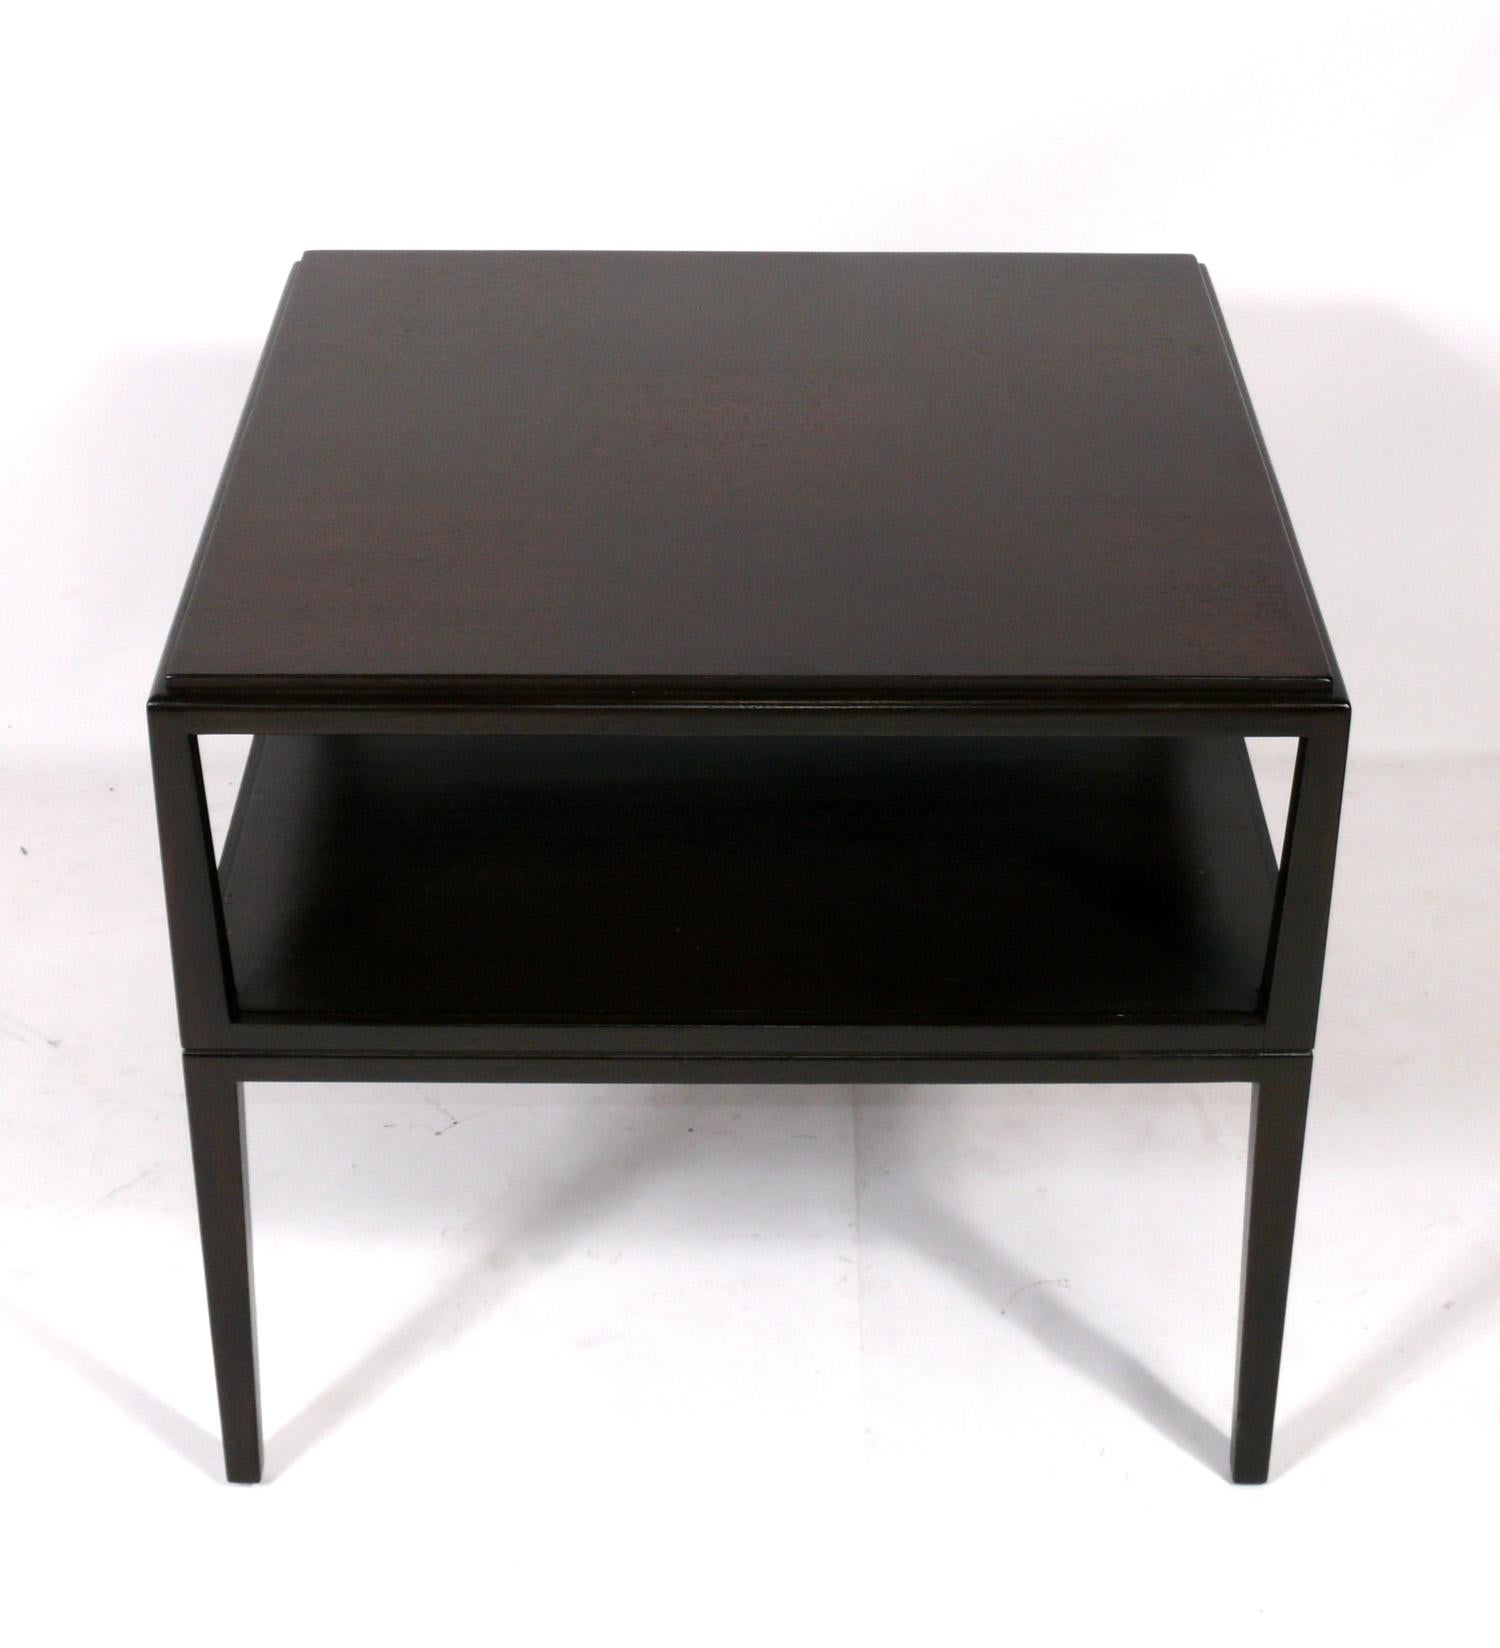 Large scale end or side table, designed by Tommi Parzinger for Charak Modern, American, circa 1950s. This piece is a versatile size and can be used as a side or end table, or as a night Stand or lamp table. It has been newly refinished in an ultra